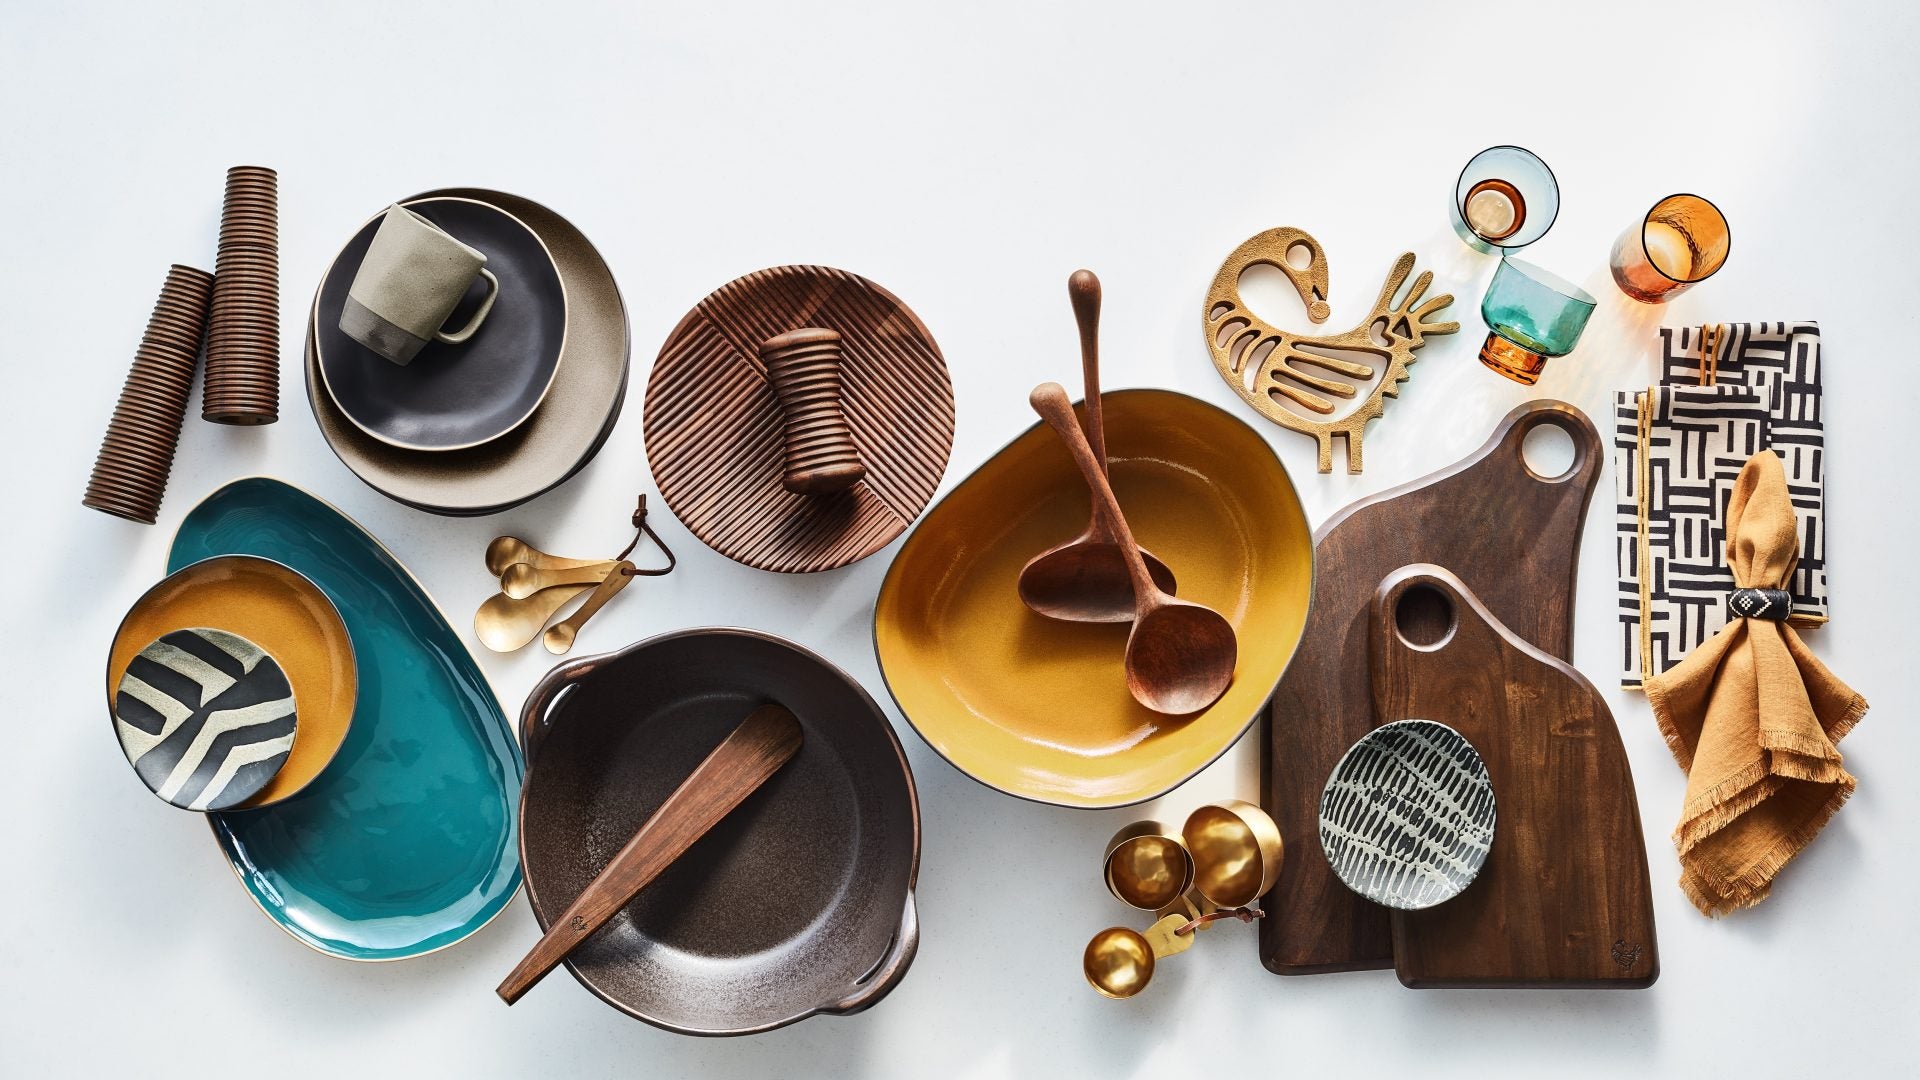 Chef Eric Adjepong’s New Home Goods Collection With Crate & Barrel Is Exquisite